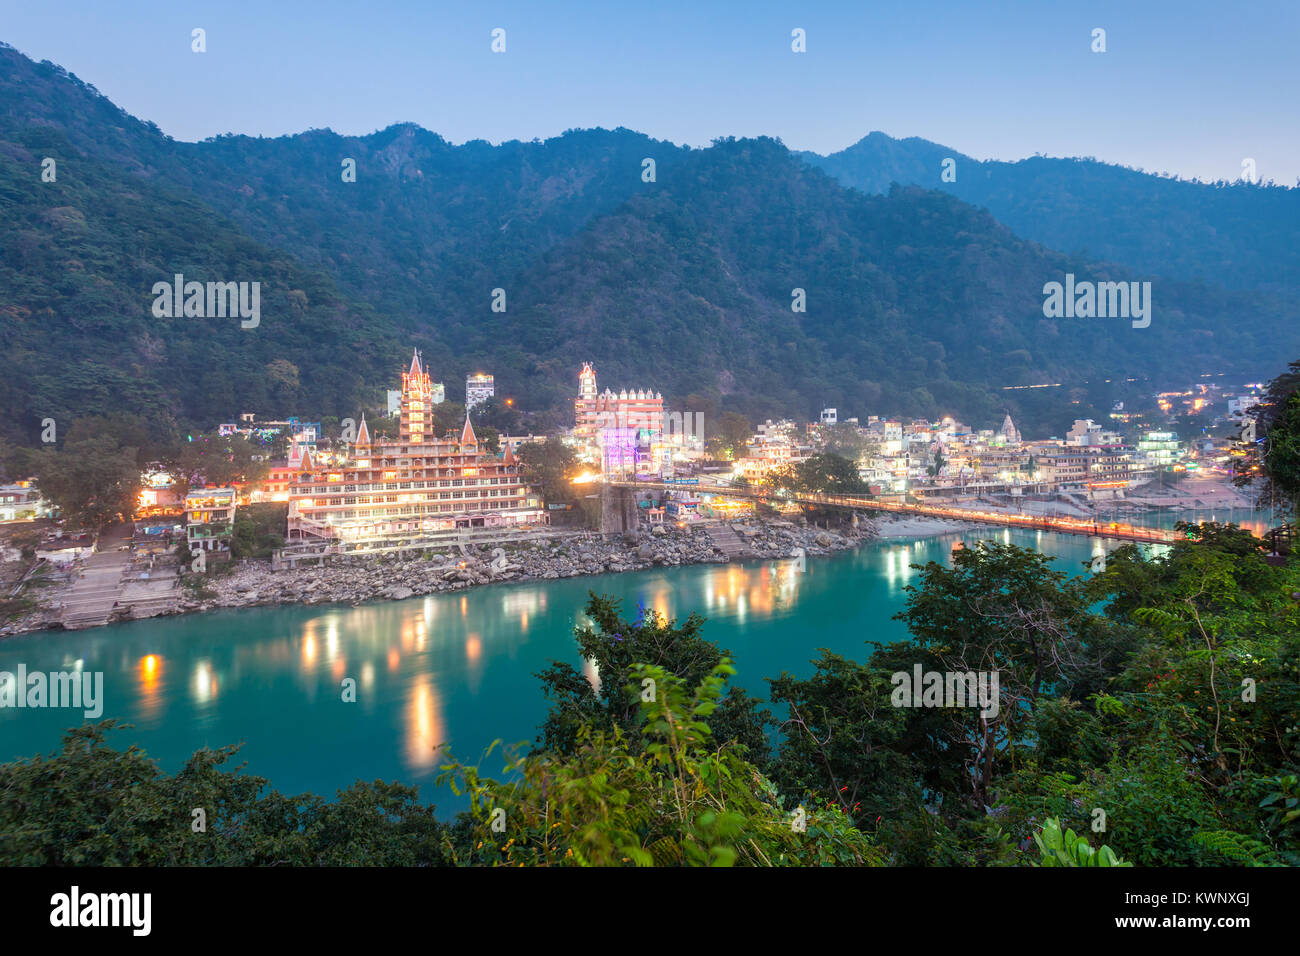 Rishikesh at night, it is a city in nothern India, it is known as the Gateway to the Garhwal Himalayas. Stock Photo